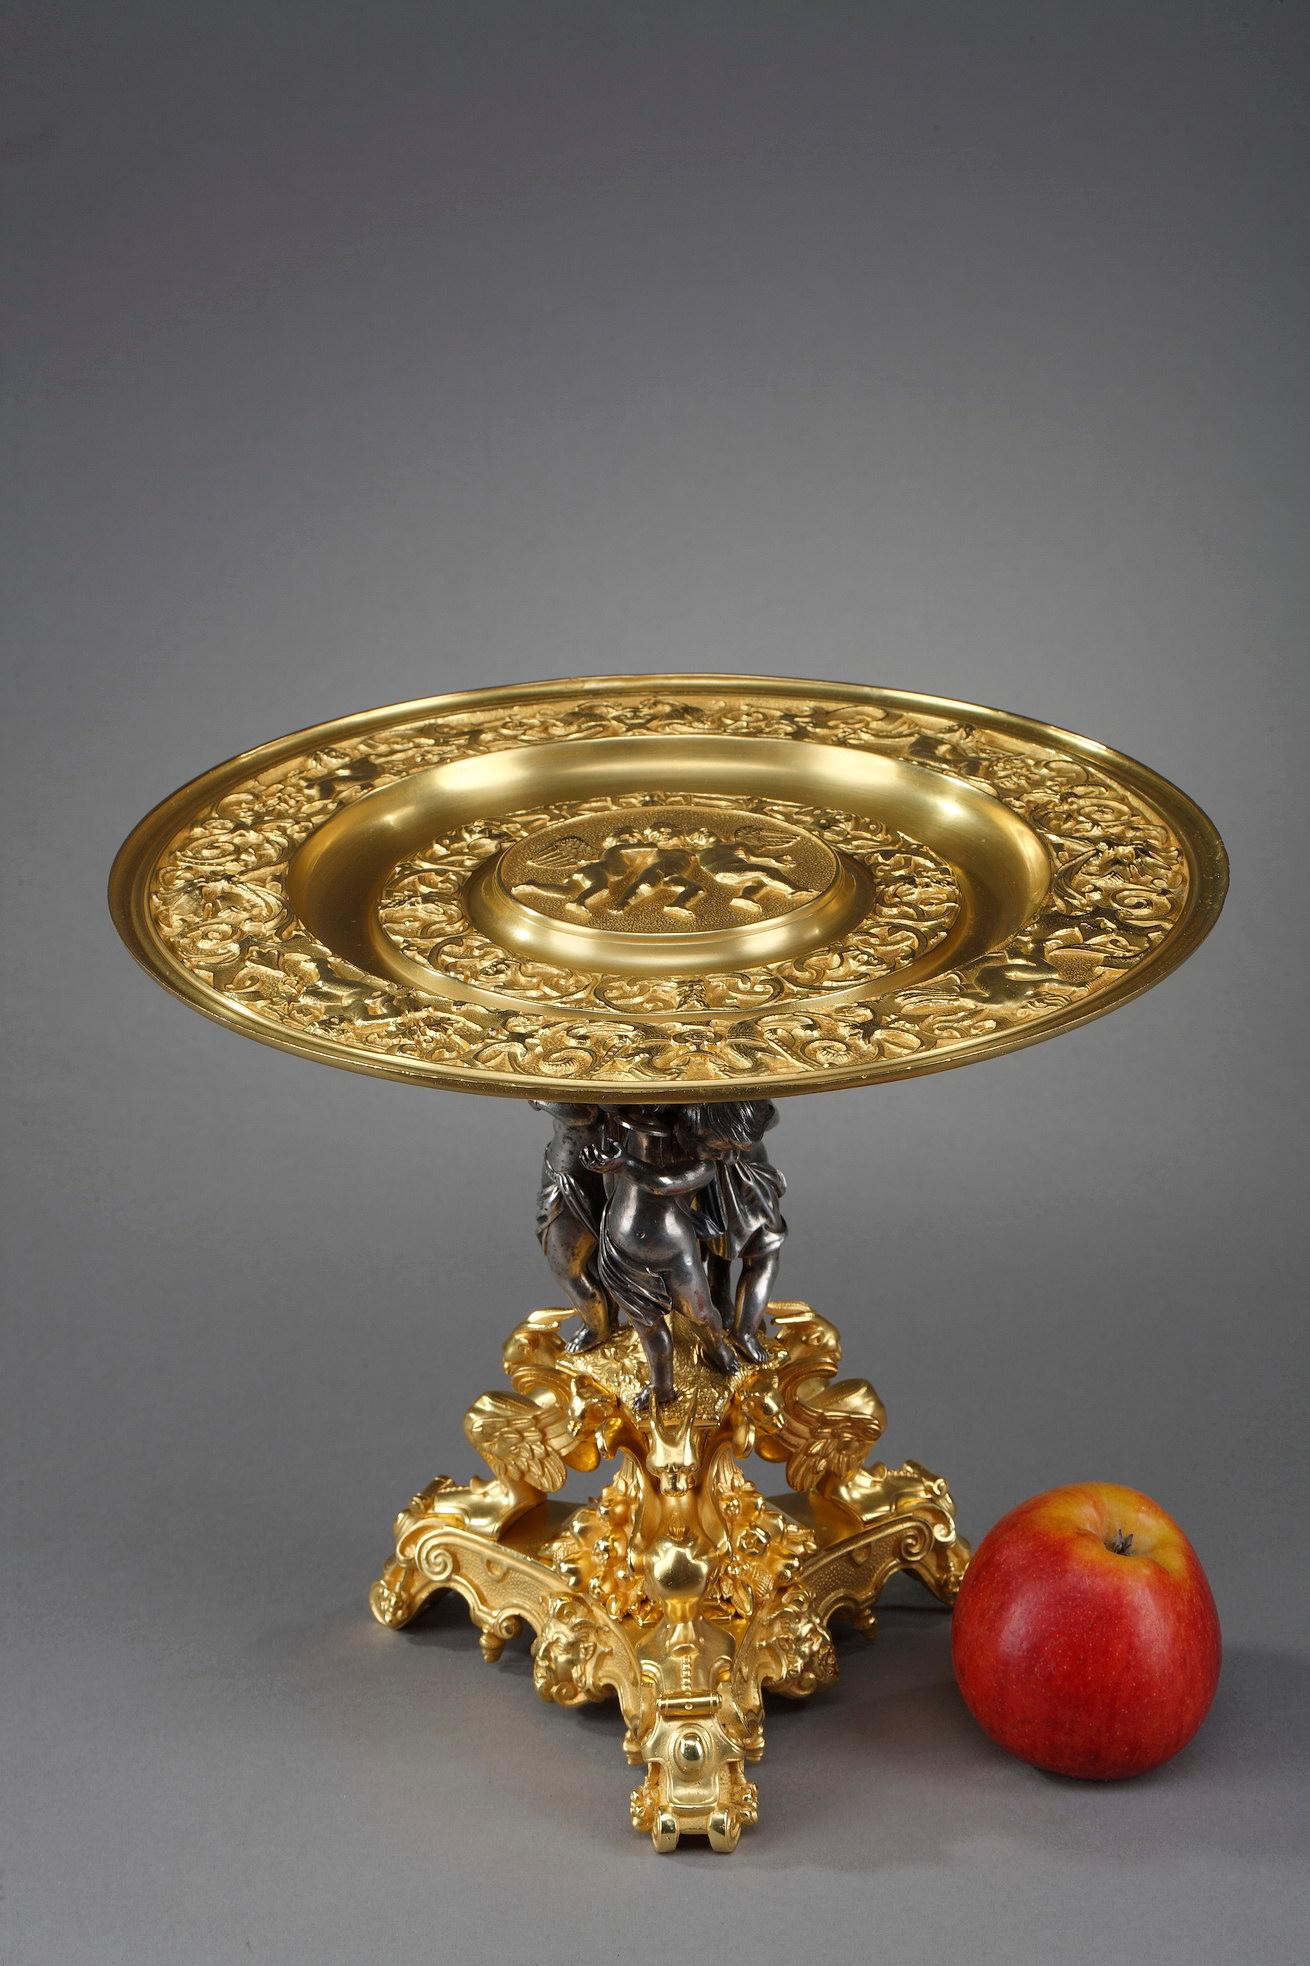 Centerpiece in gilt bronze decorated with three putti musicians in silver bronze on the shaft. The central tray in gilt bronze is engraved with motifs and three putti in the center. It rests on a base decorated with three winged griffins and heads